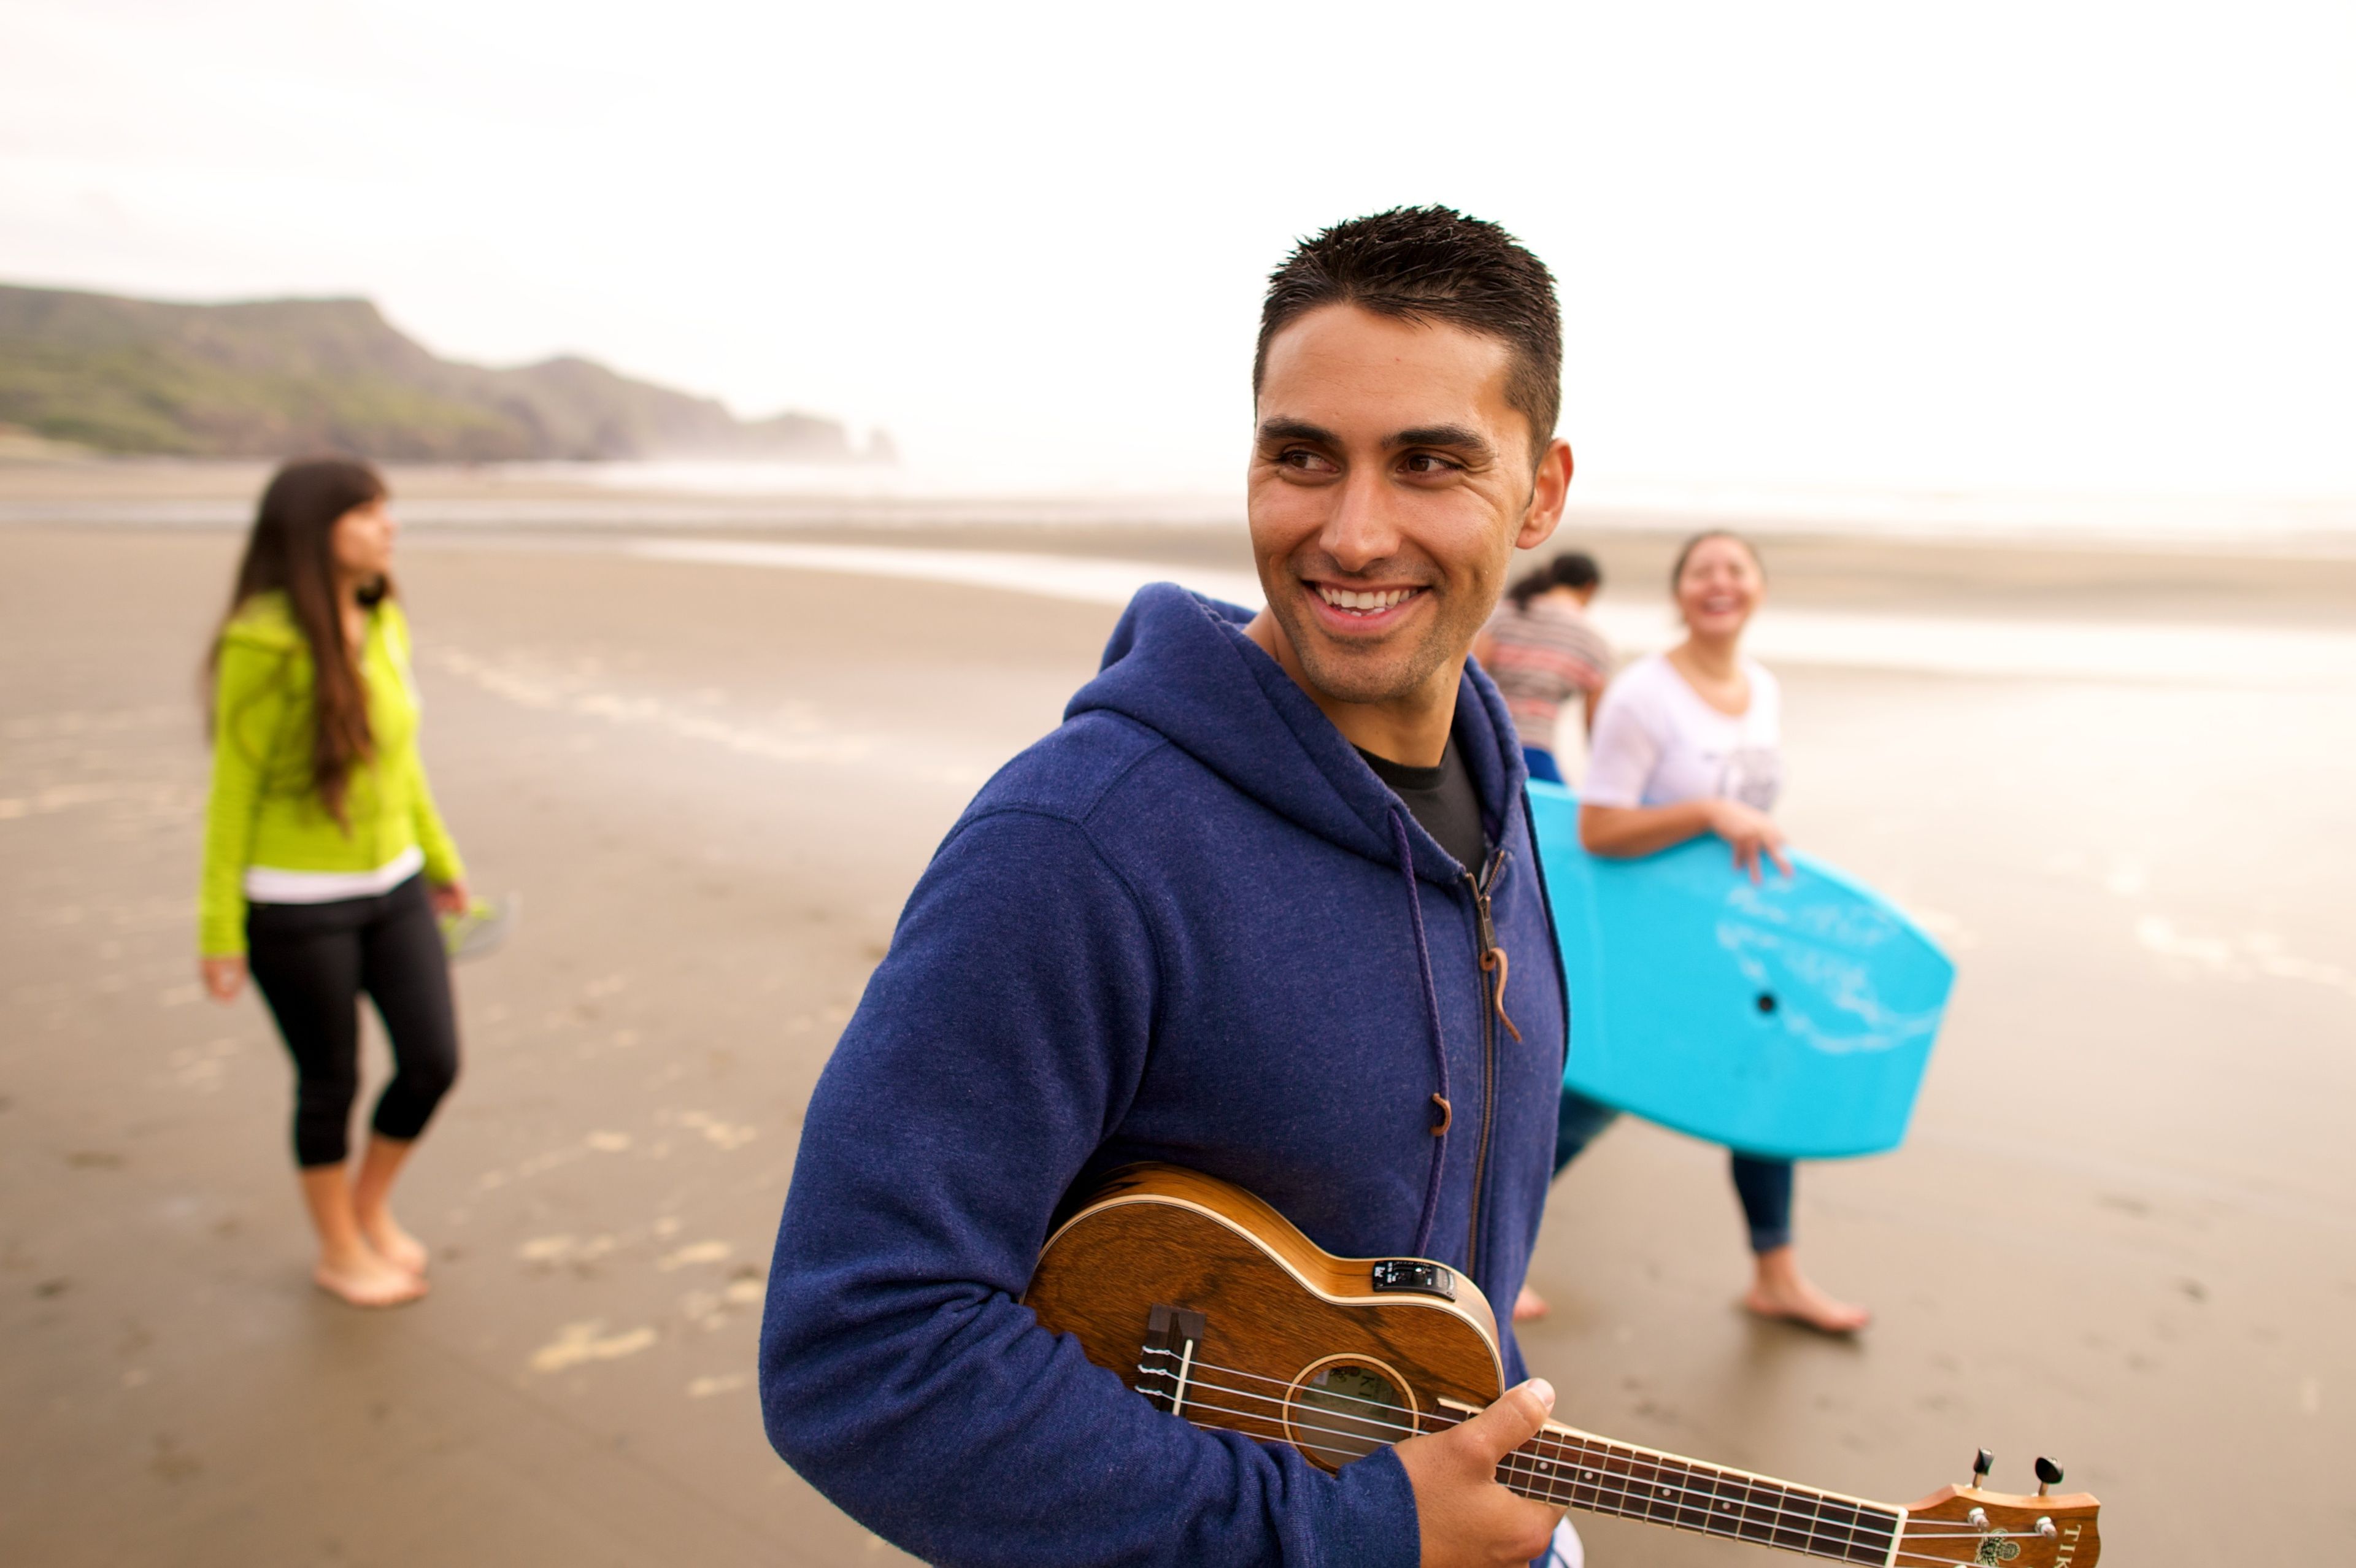 A young man walks along the beach, holding an ukulele, while other youth walk behind him.